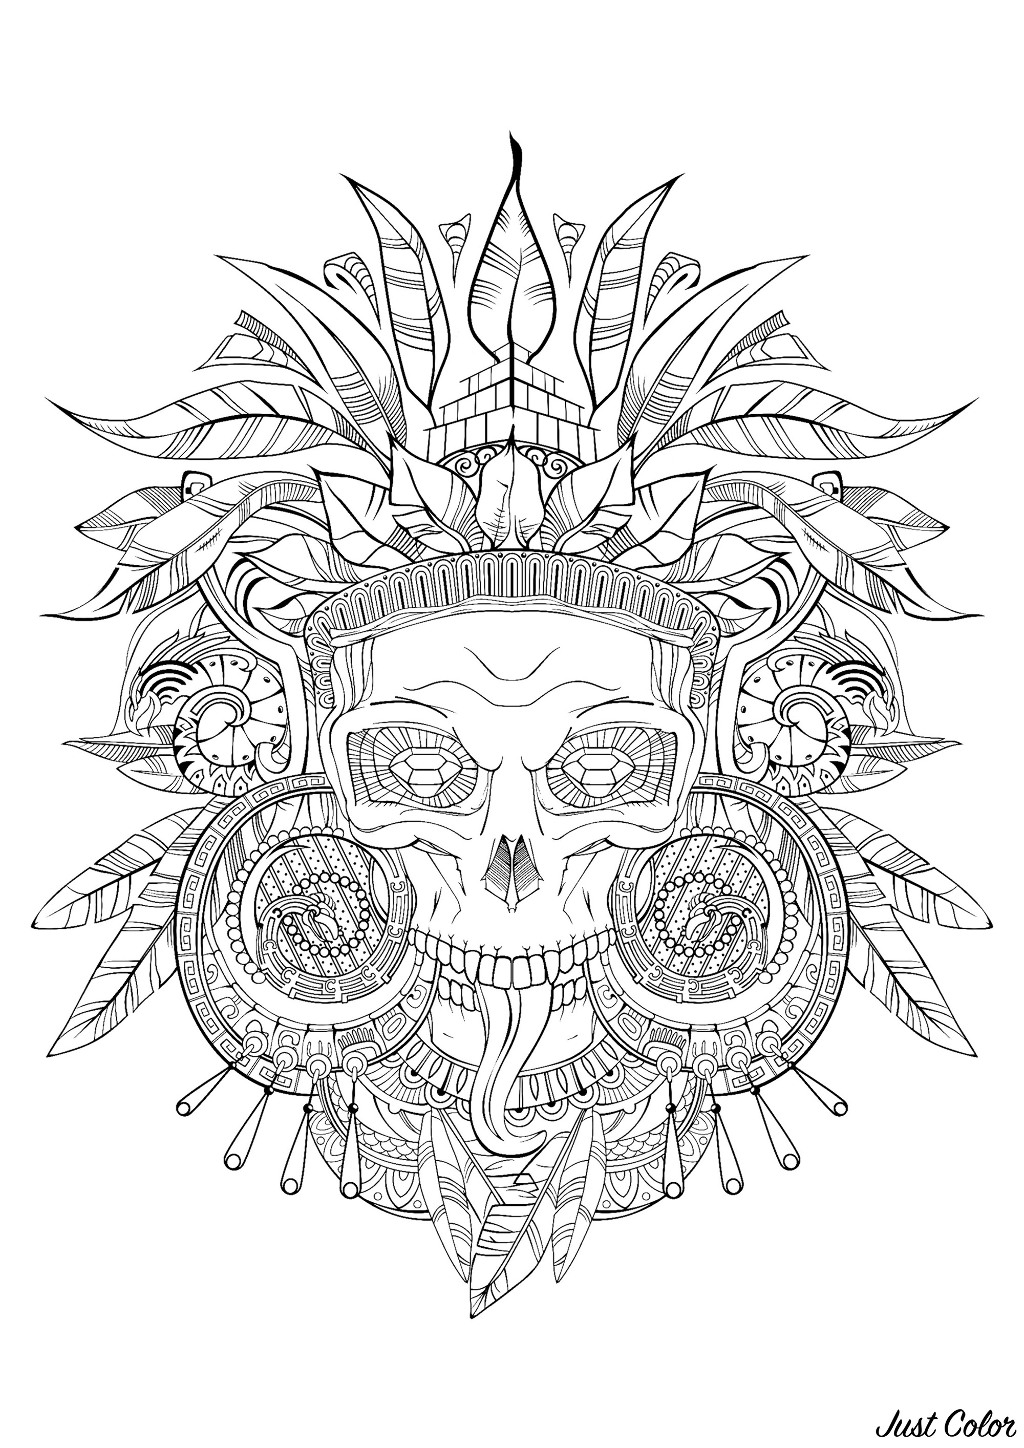 Incredible Aztec skull - black and white